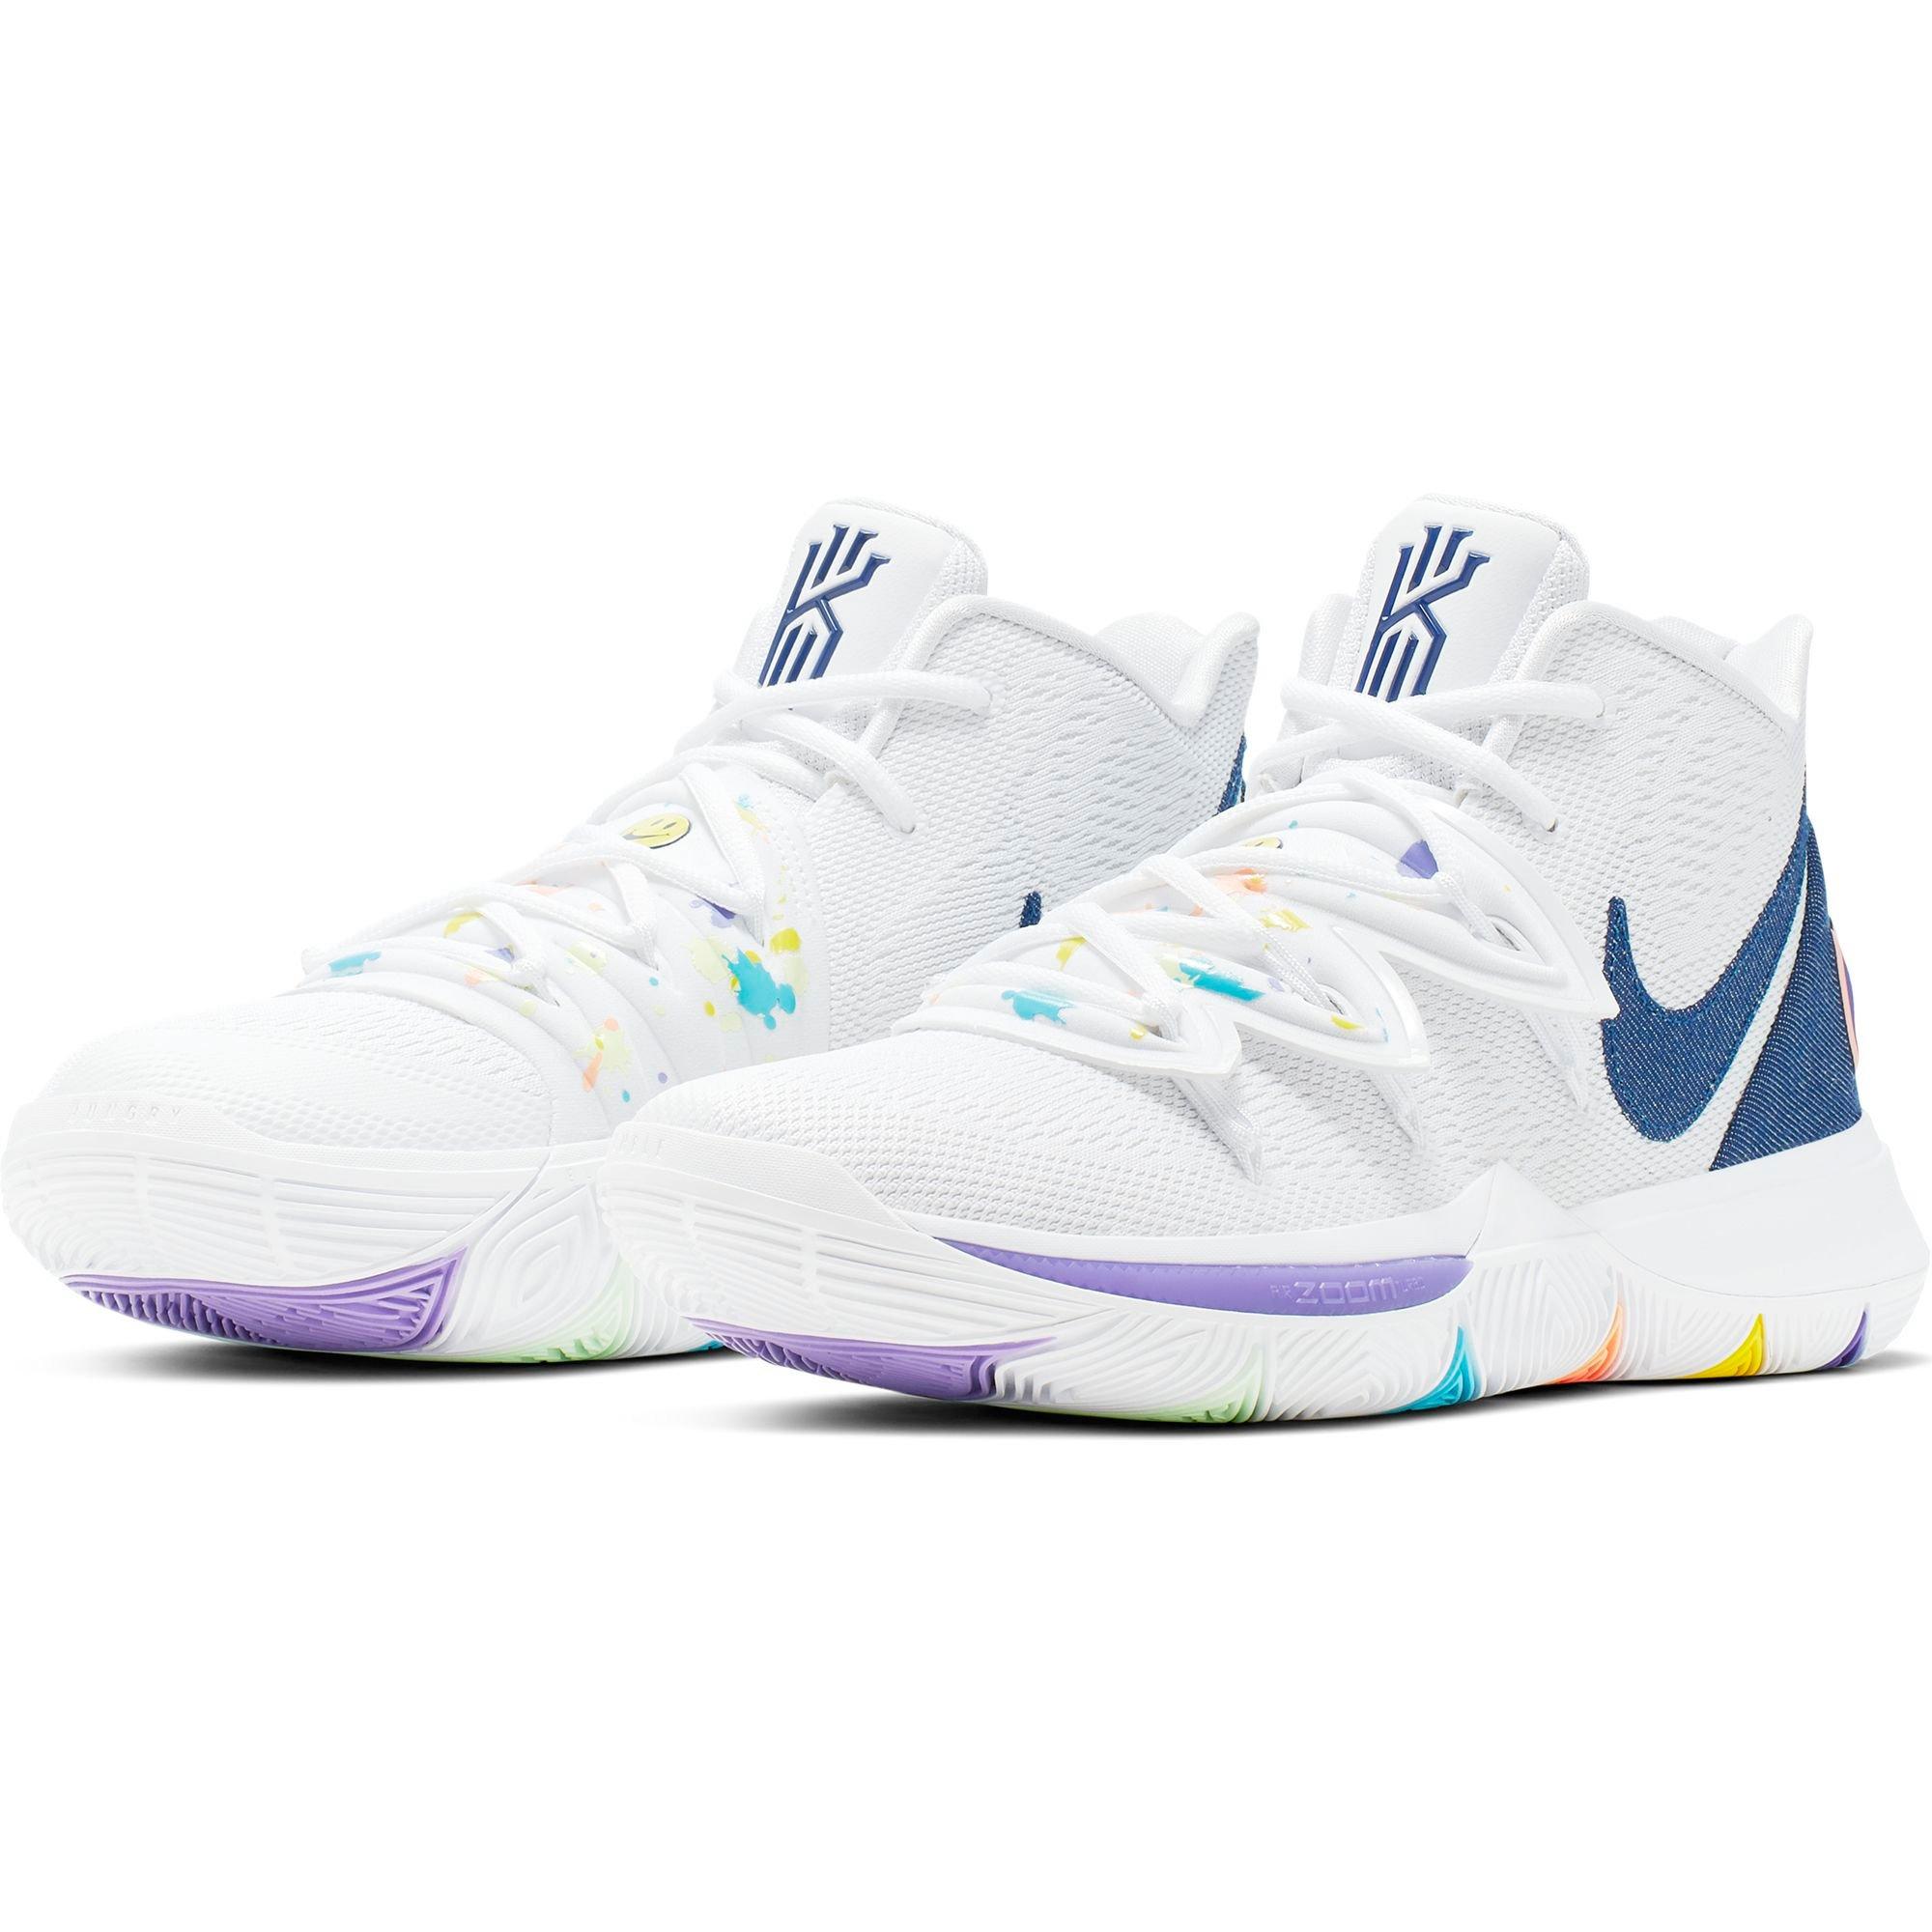 Sneakers Release- Nike Kyrie 5 “Have a 